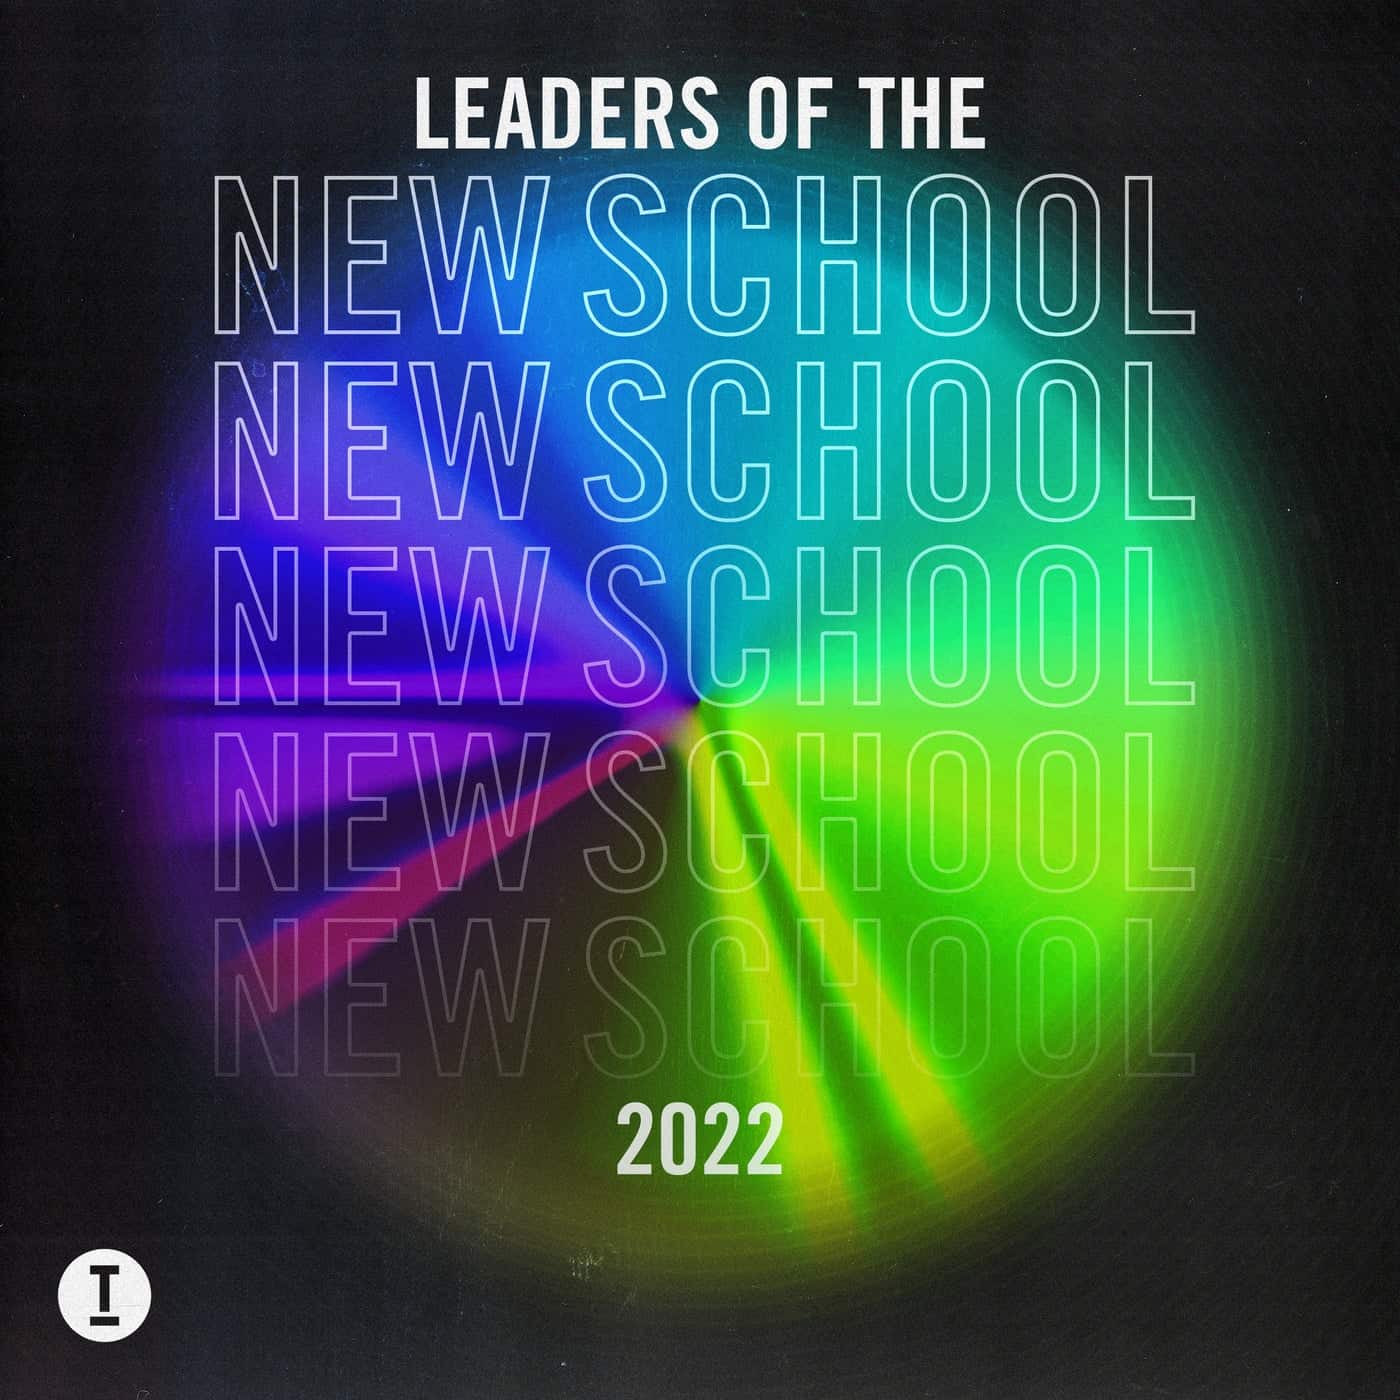 Download VA - Leaders Of The New School 2022 Vol. 2 on Electrobuzz